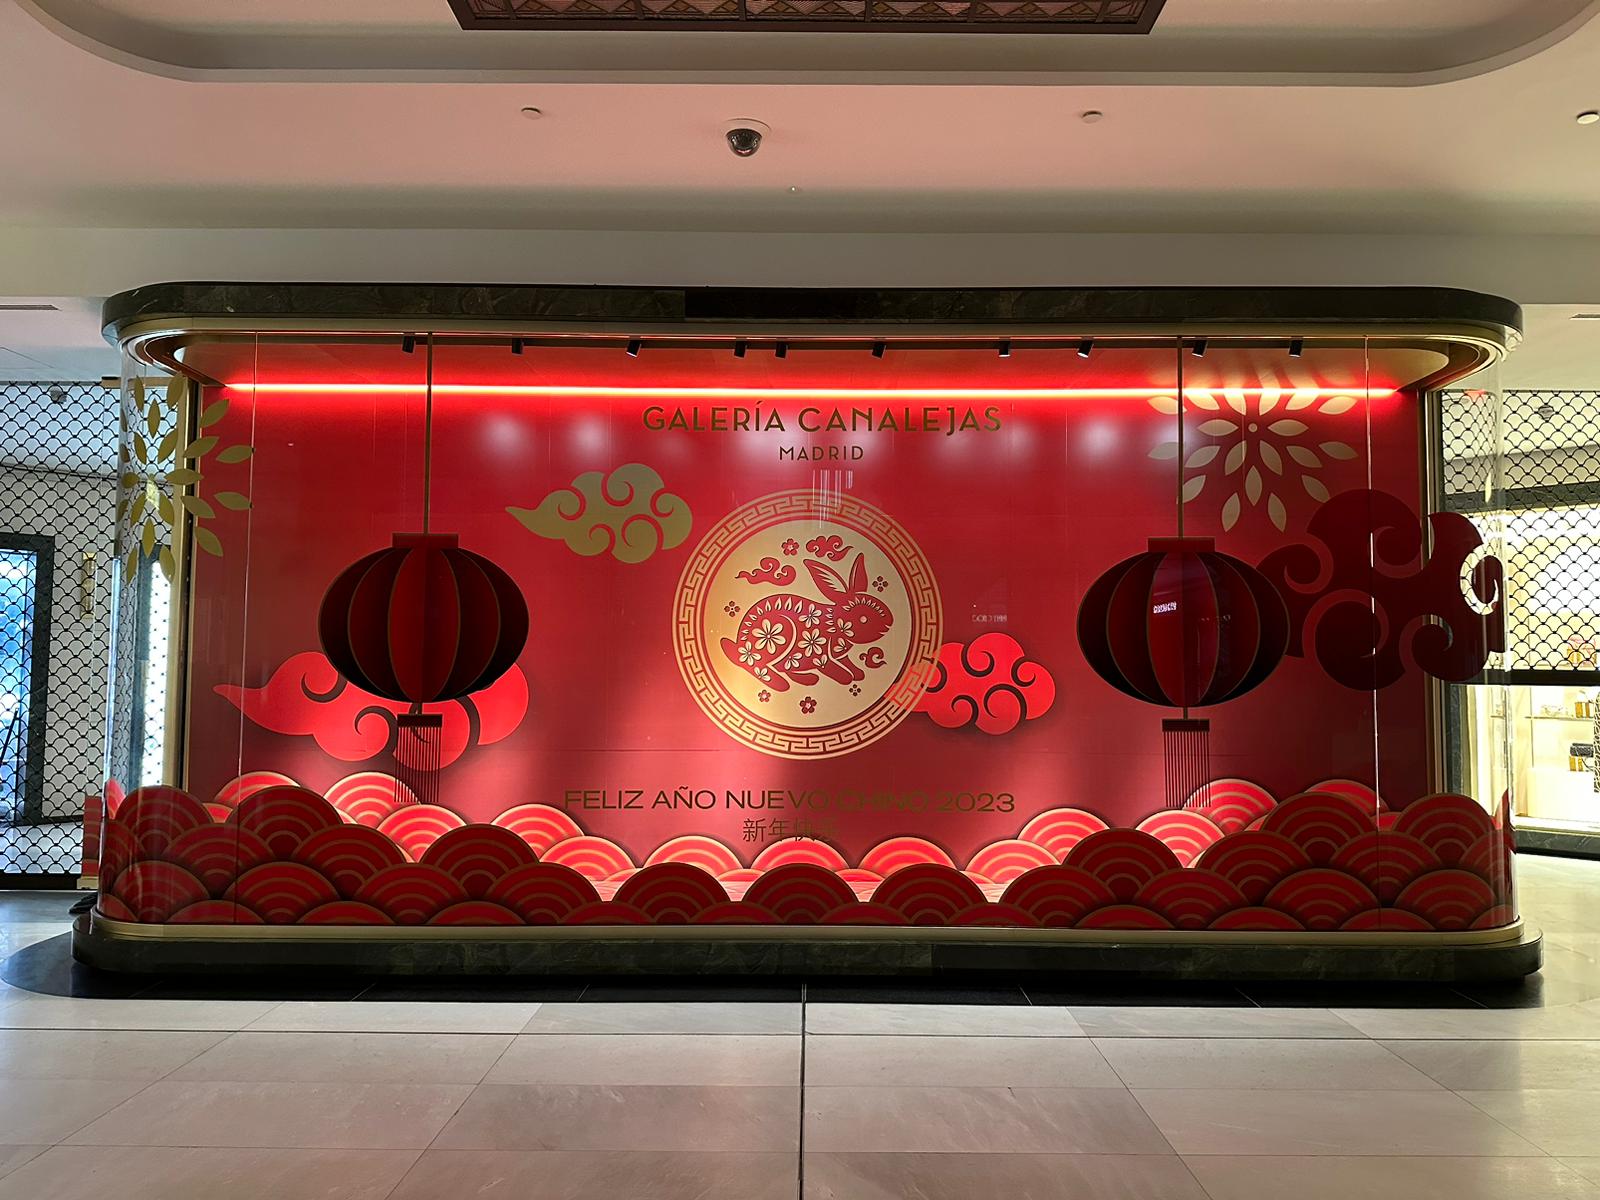 START THE CHINESE NEW YEAR AT GALERÍA CANALEJAS